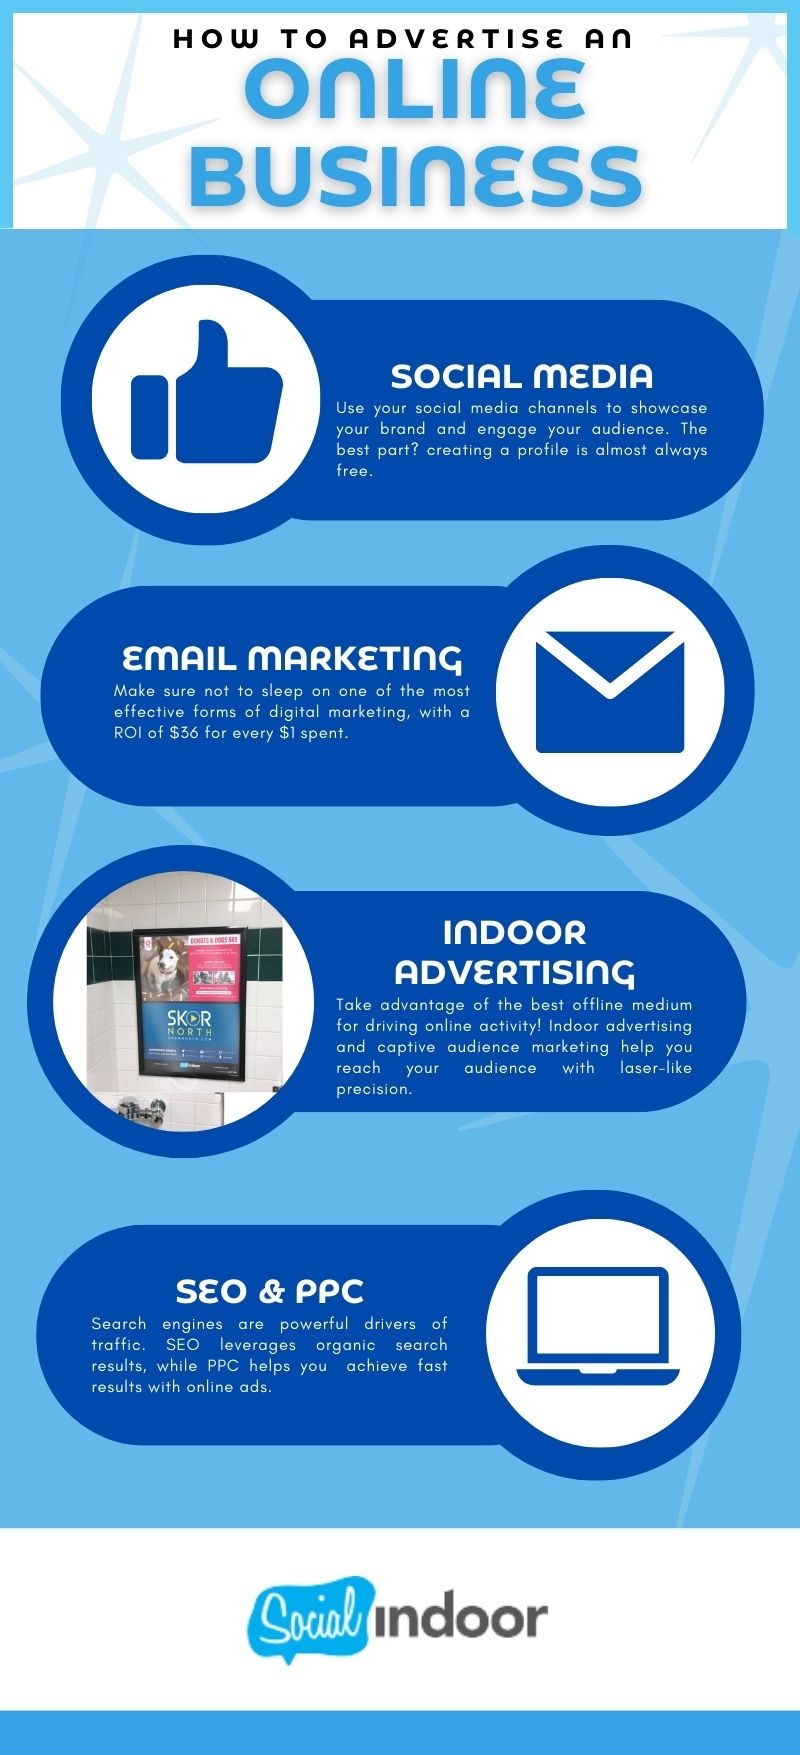 infographic showing the best ways to advertise an online business: social media, email marketing, indoor advertising, and SEO/PPC